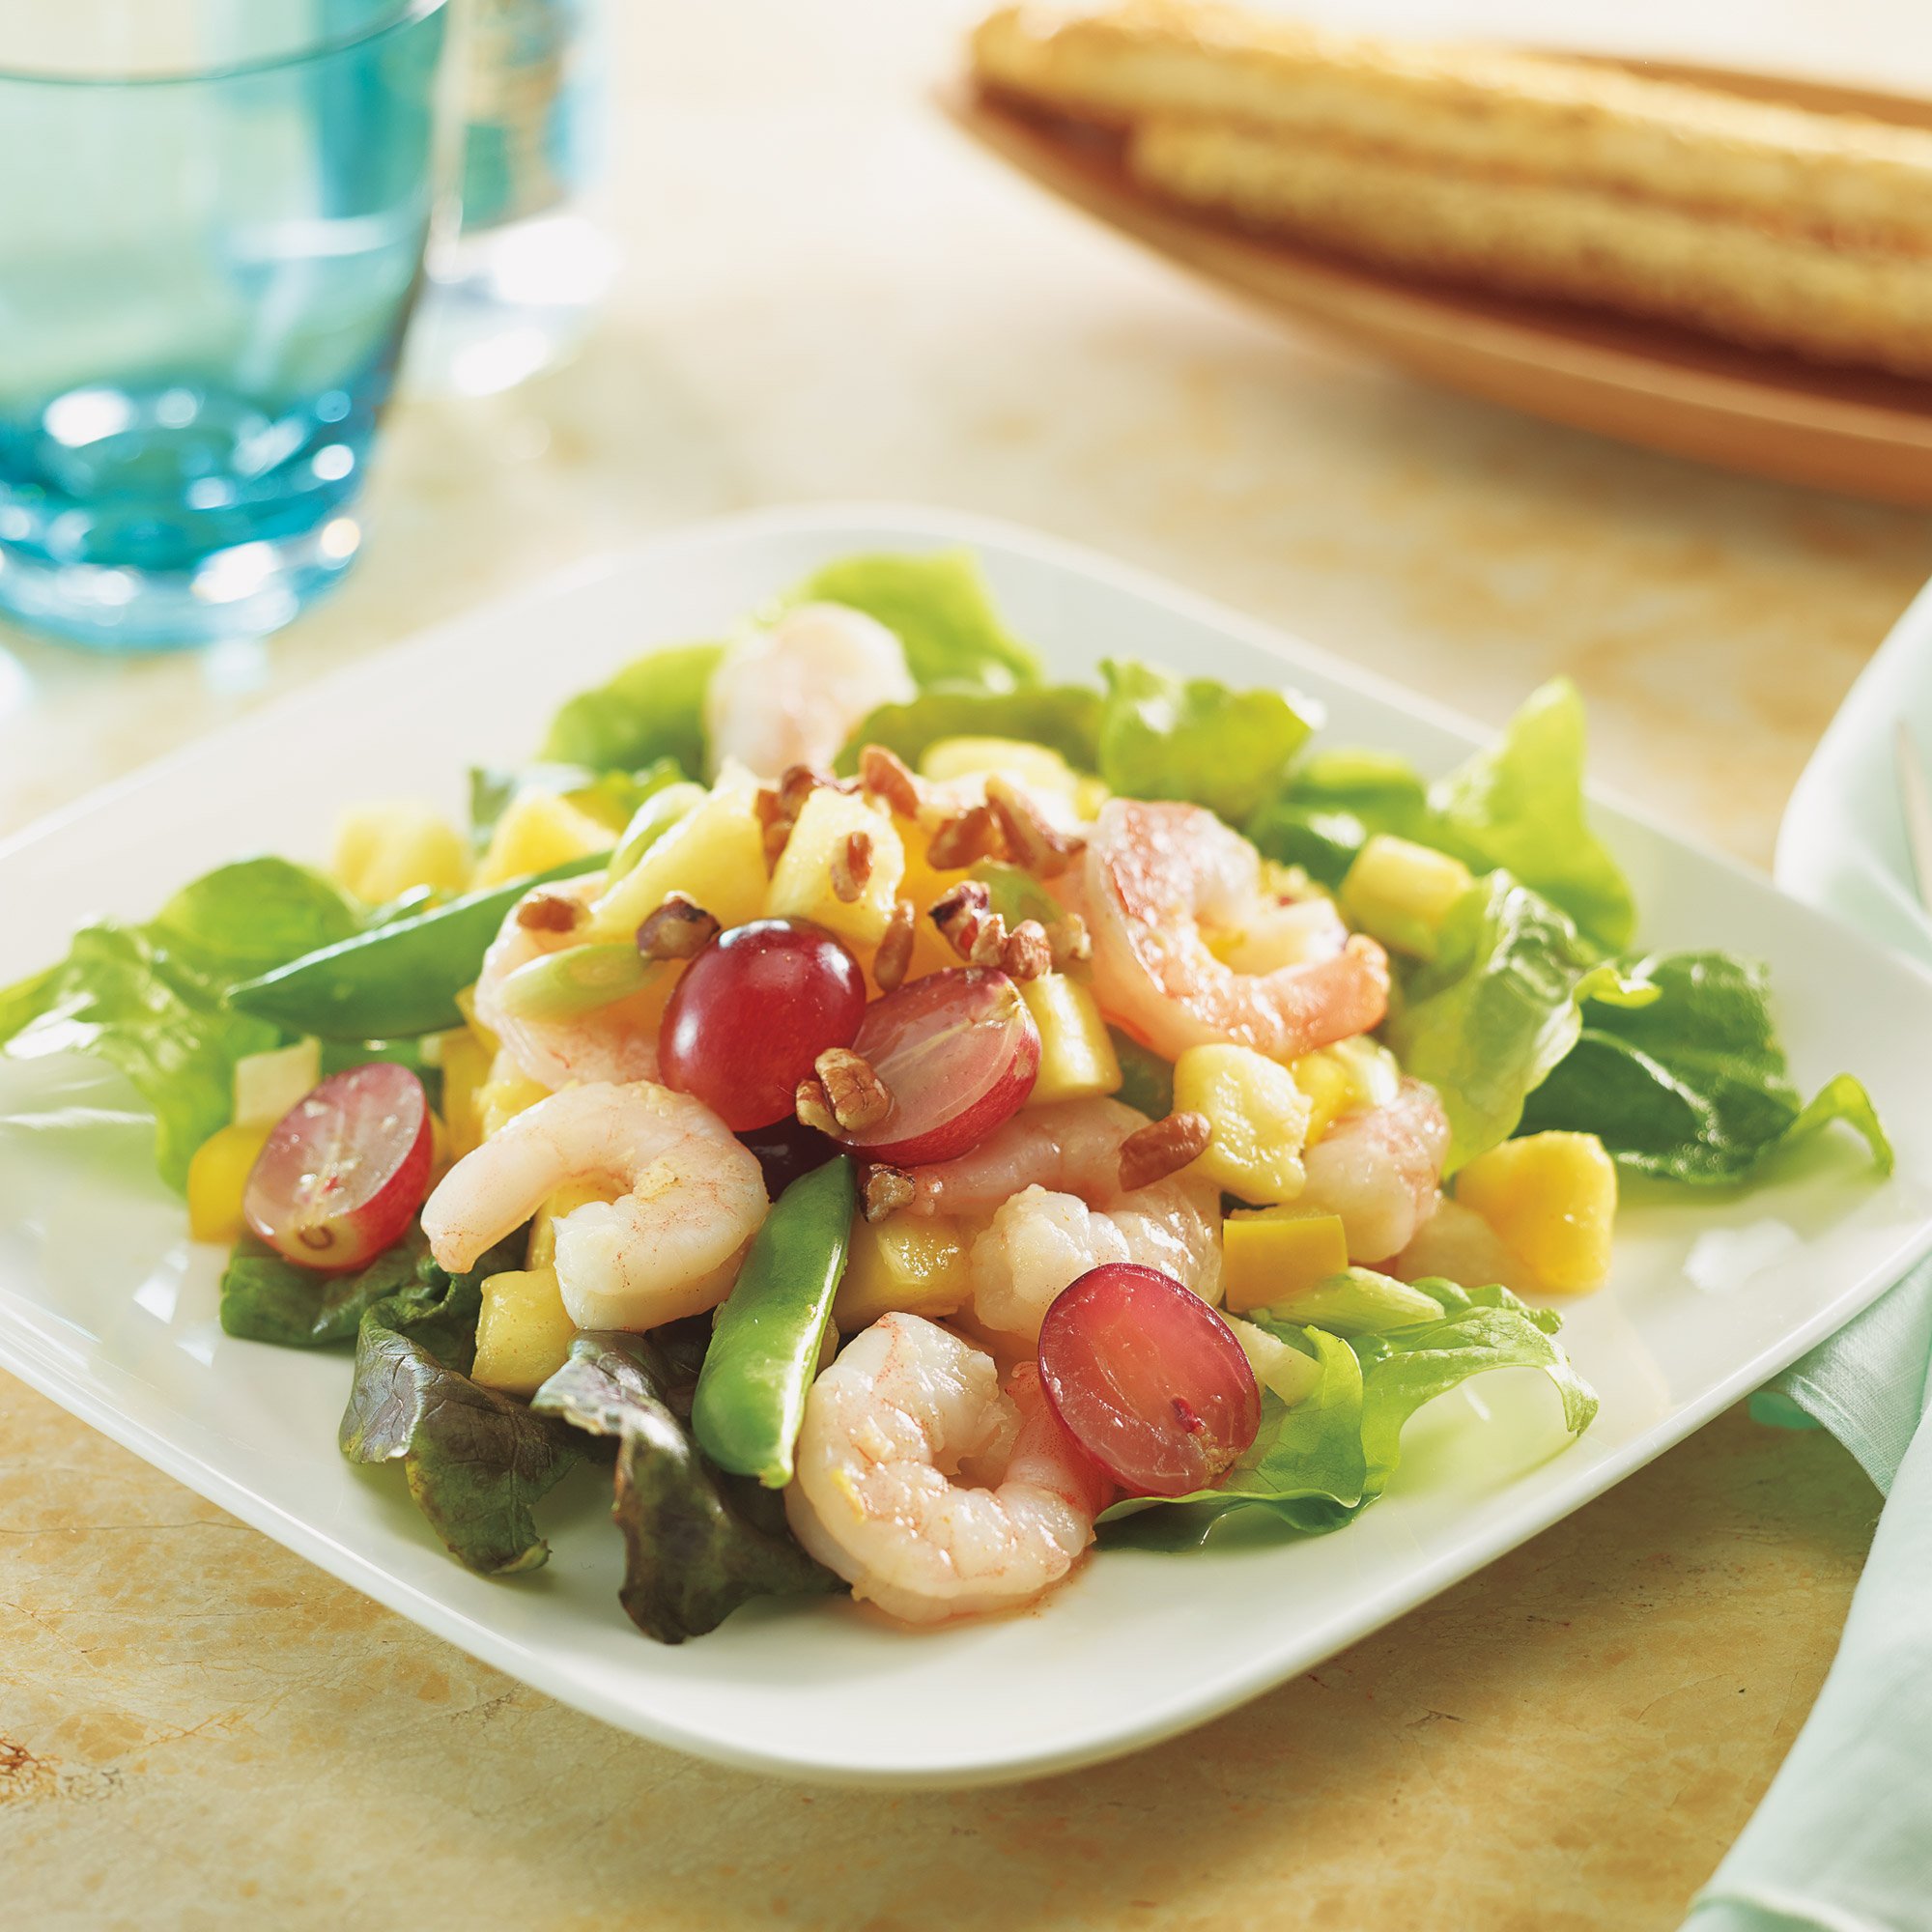 Touch Of The Tropics Shrimp Salad Recipe from H-E-B